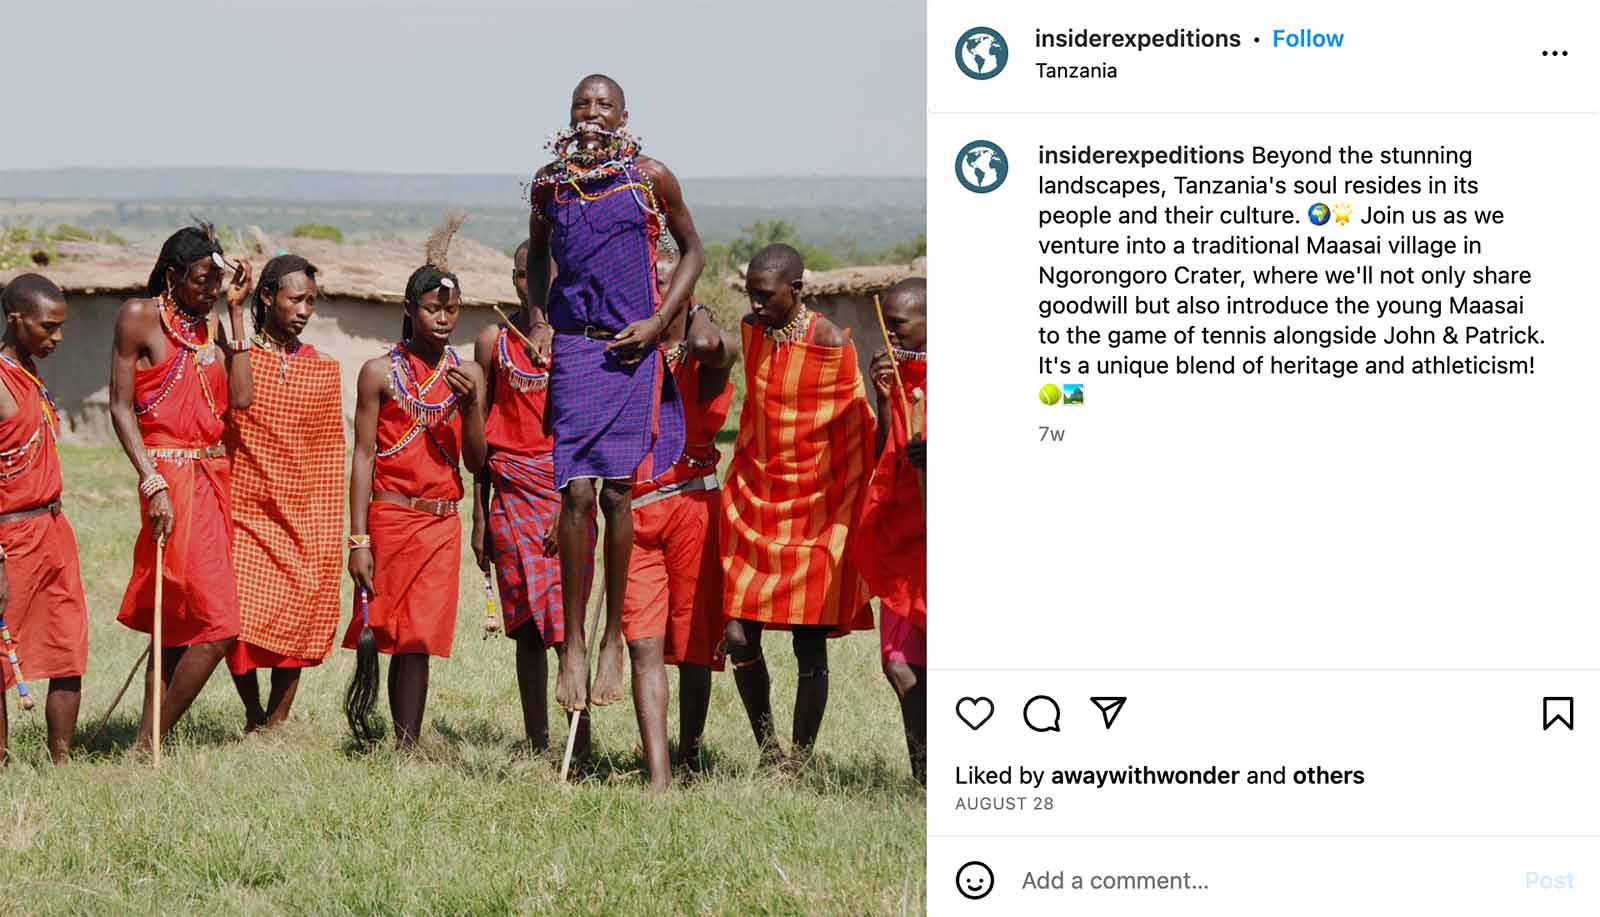 Instagram promotional image featuring a group of Maasai 